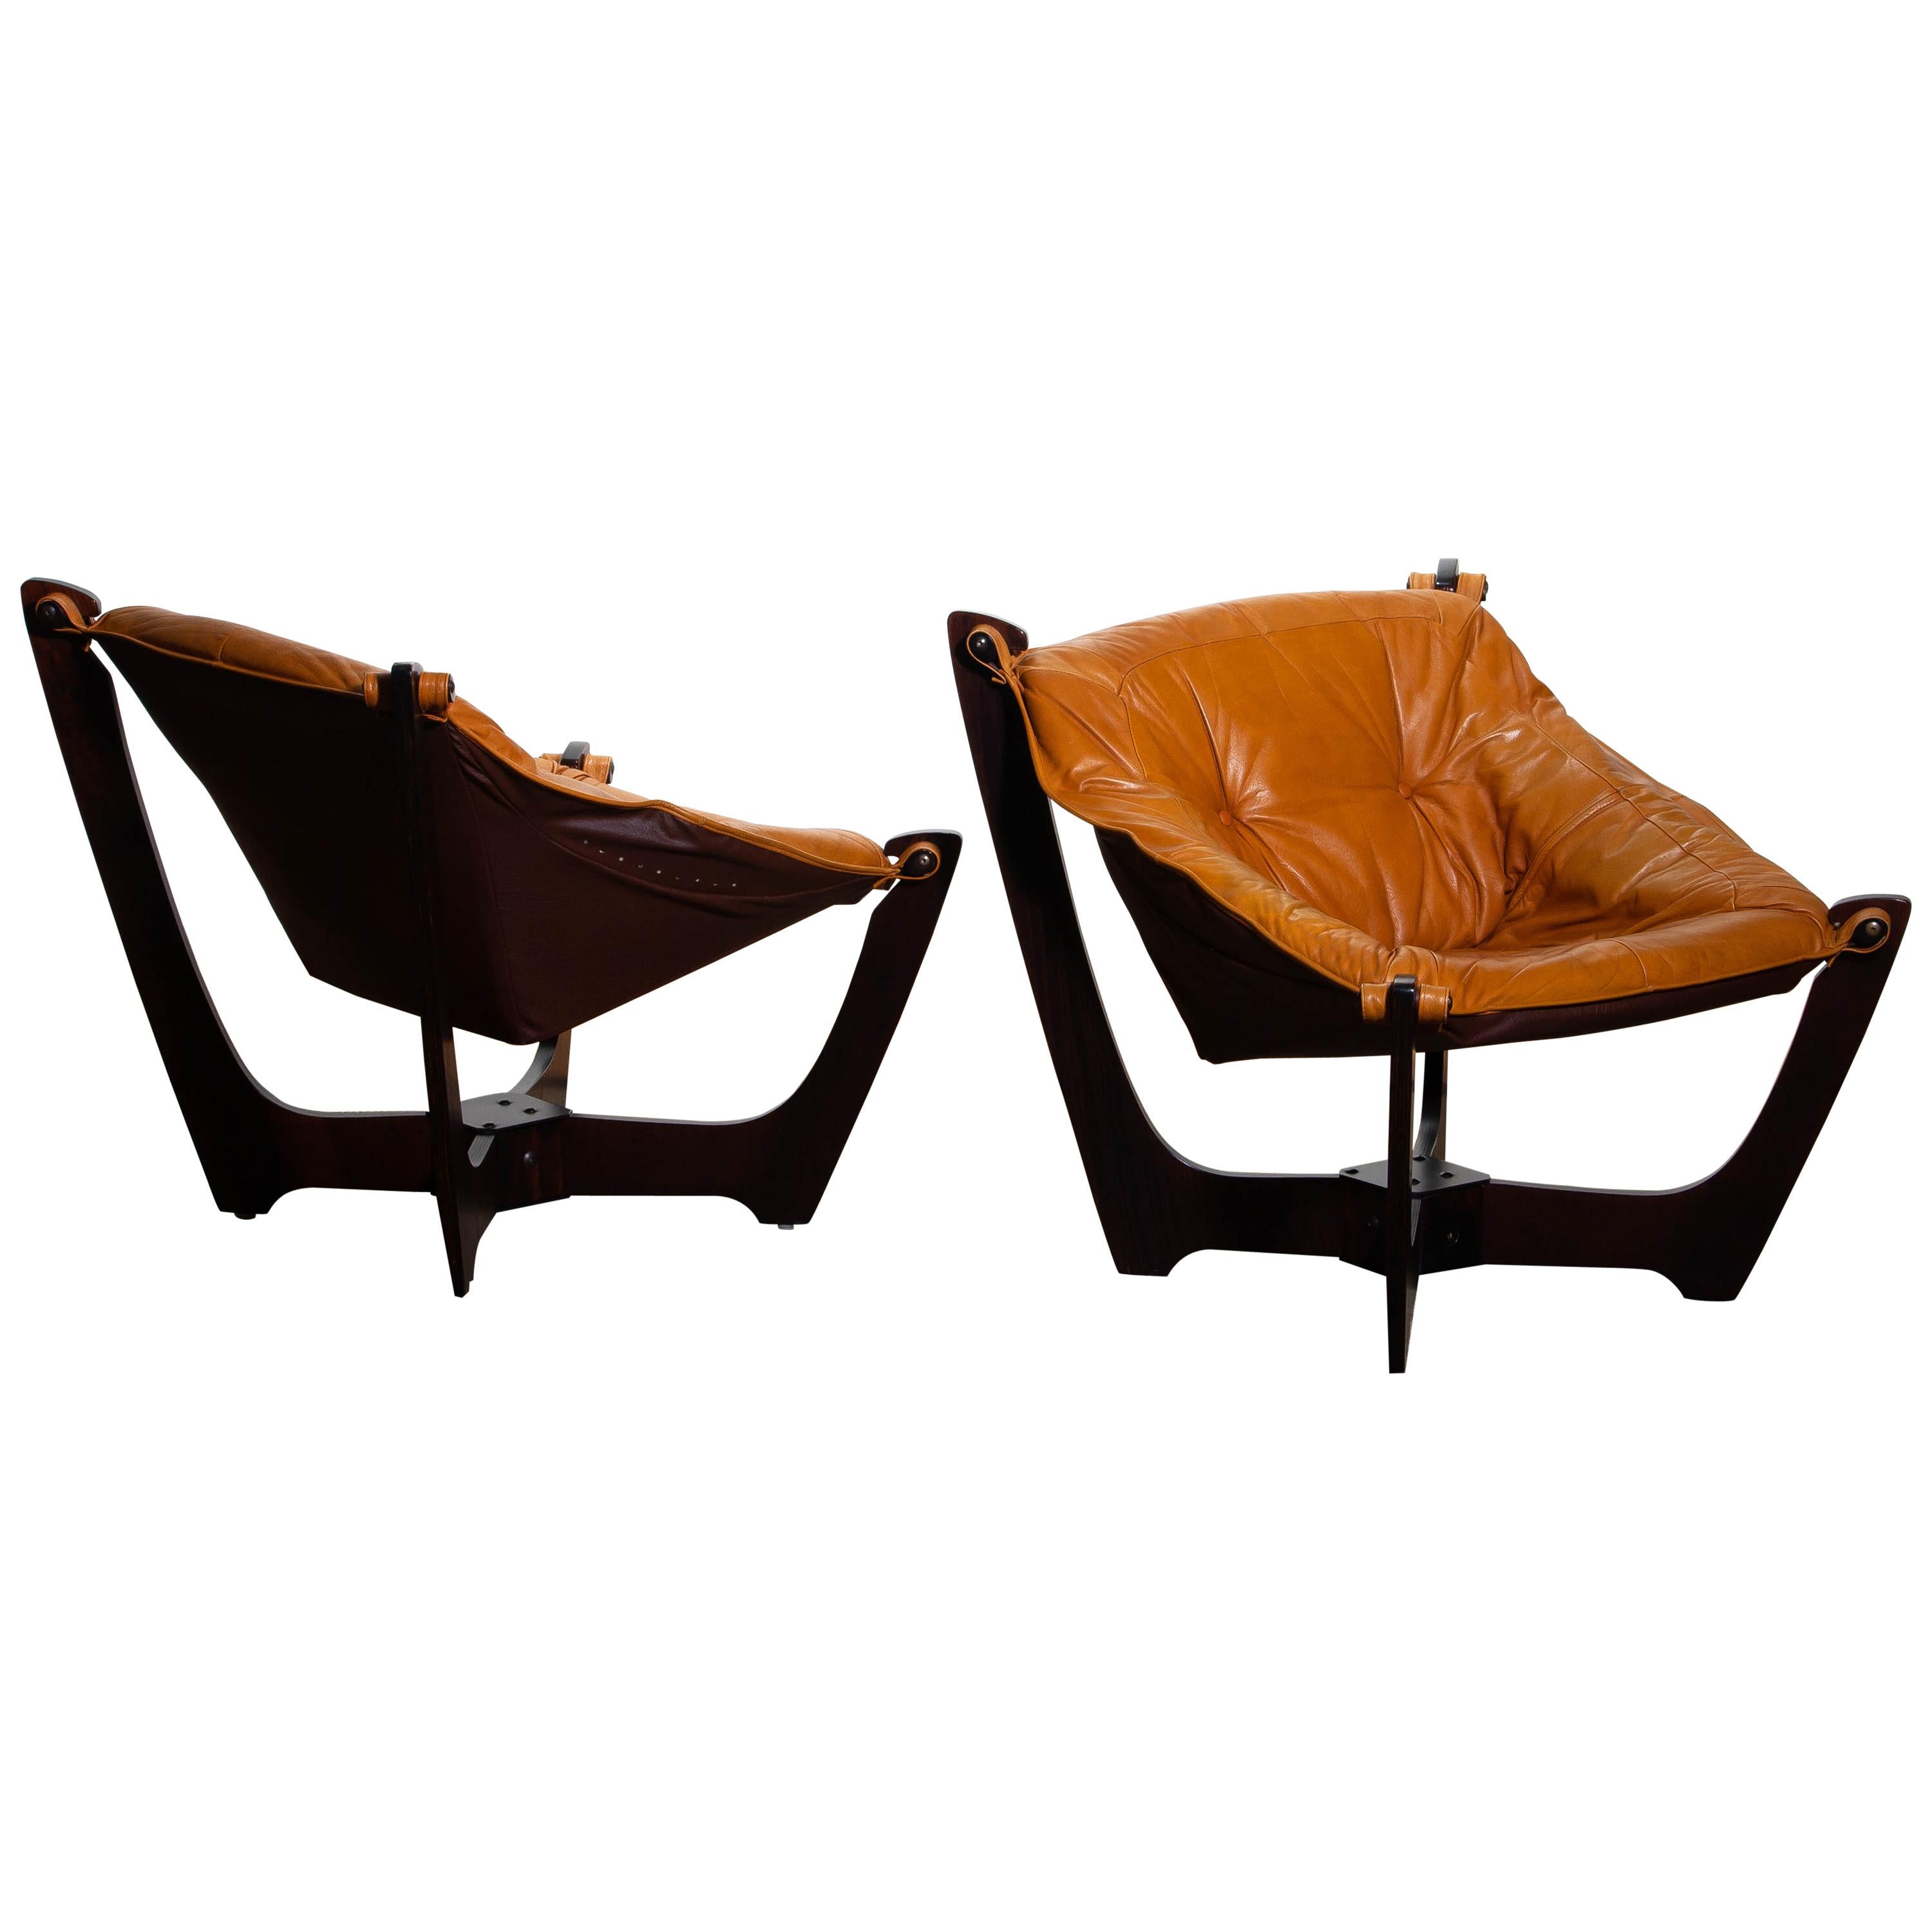 Norwegian 1970 Pair of Leather Lounge Chairs by Odd Knutsen for Hjellegjerde Møbler Norway